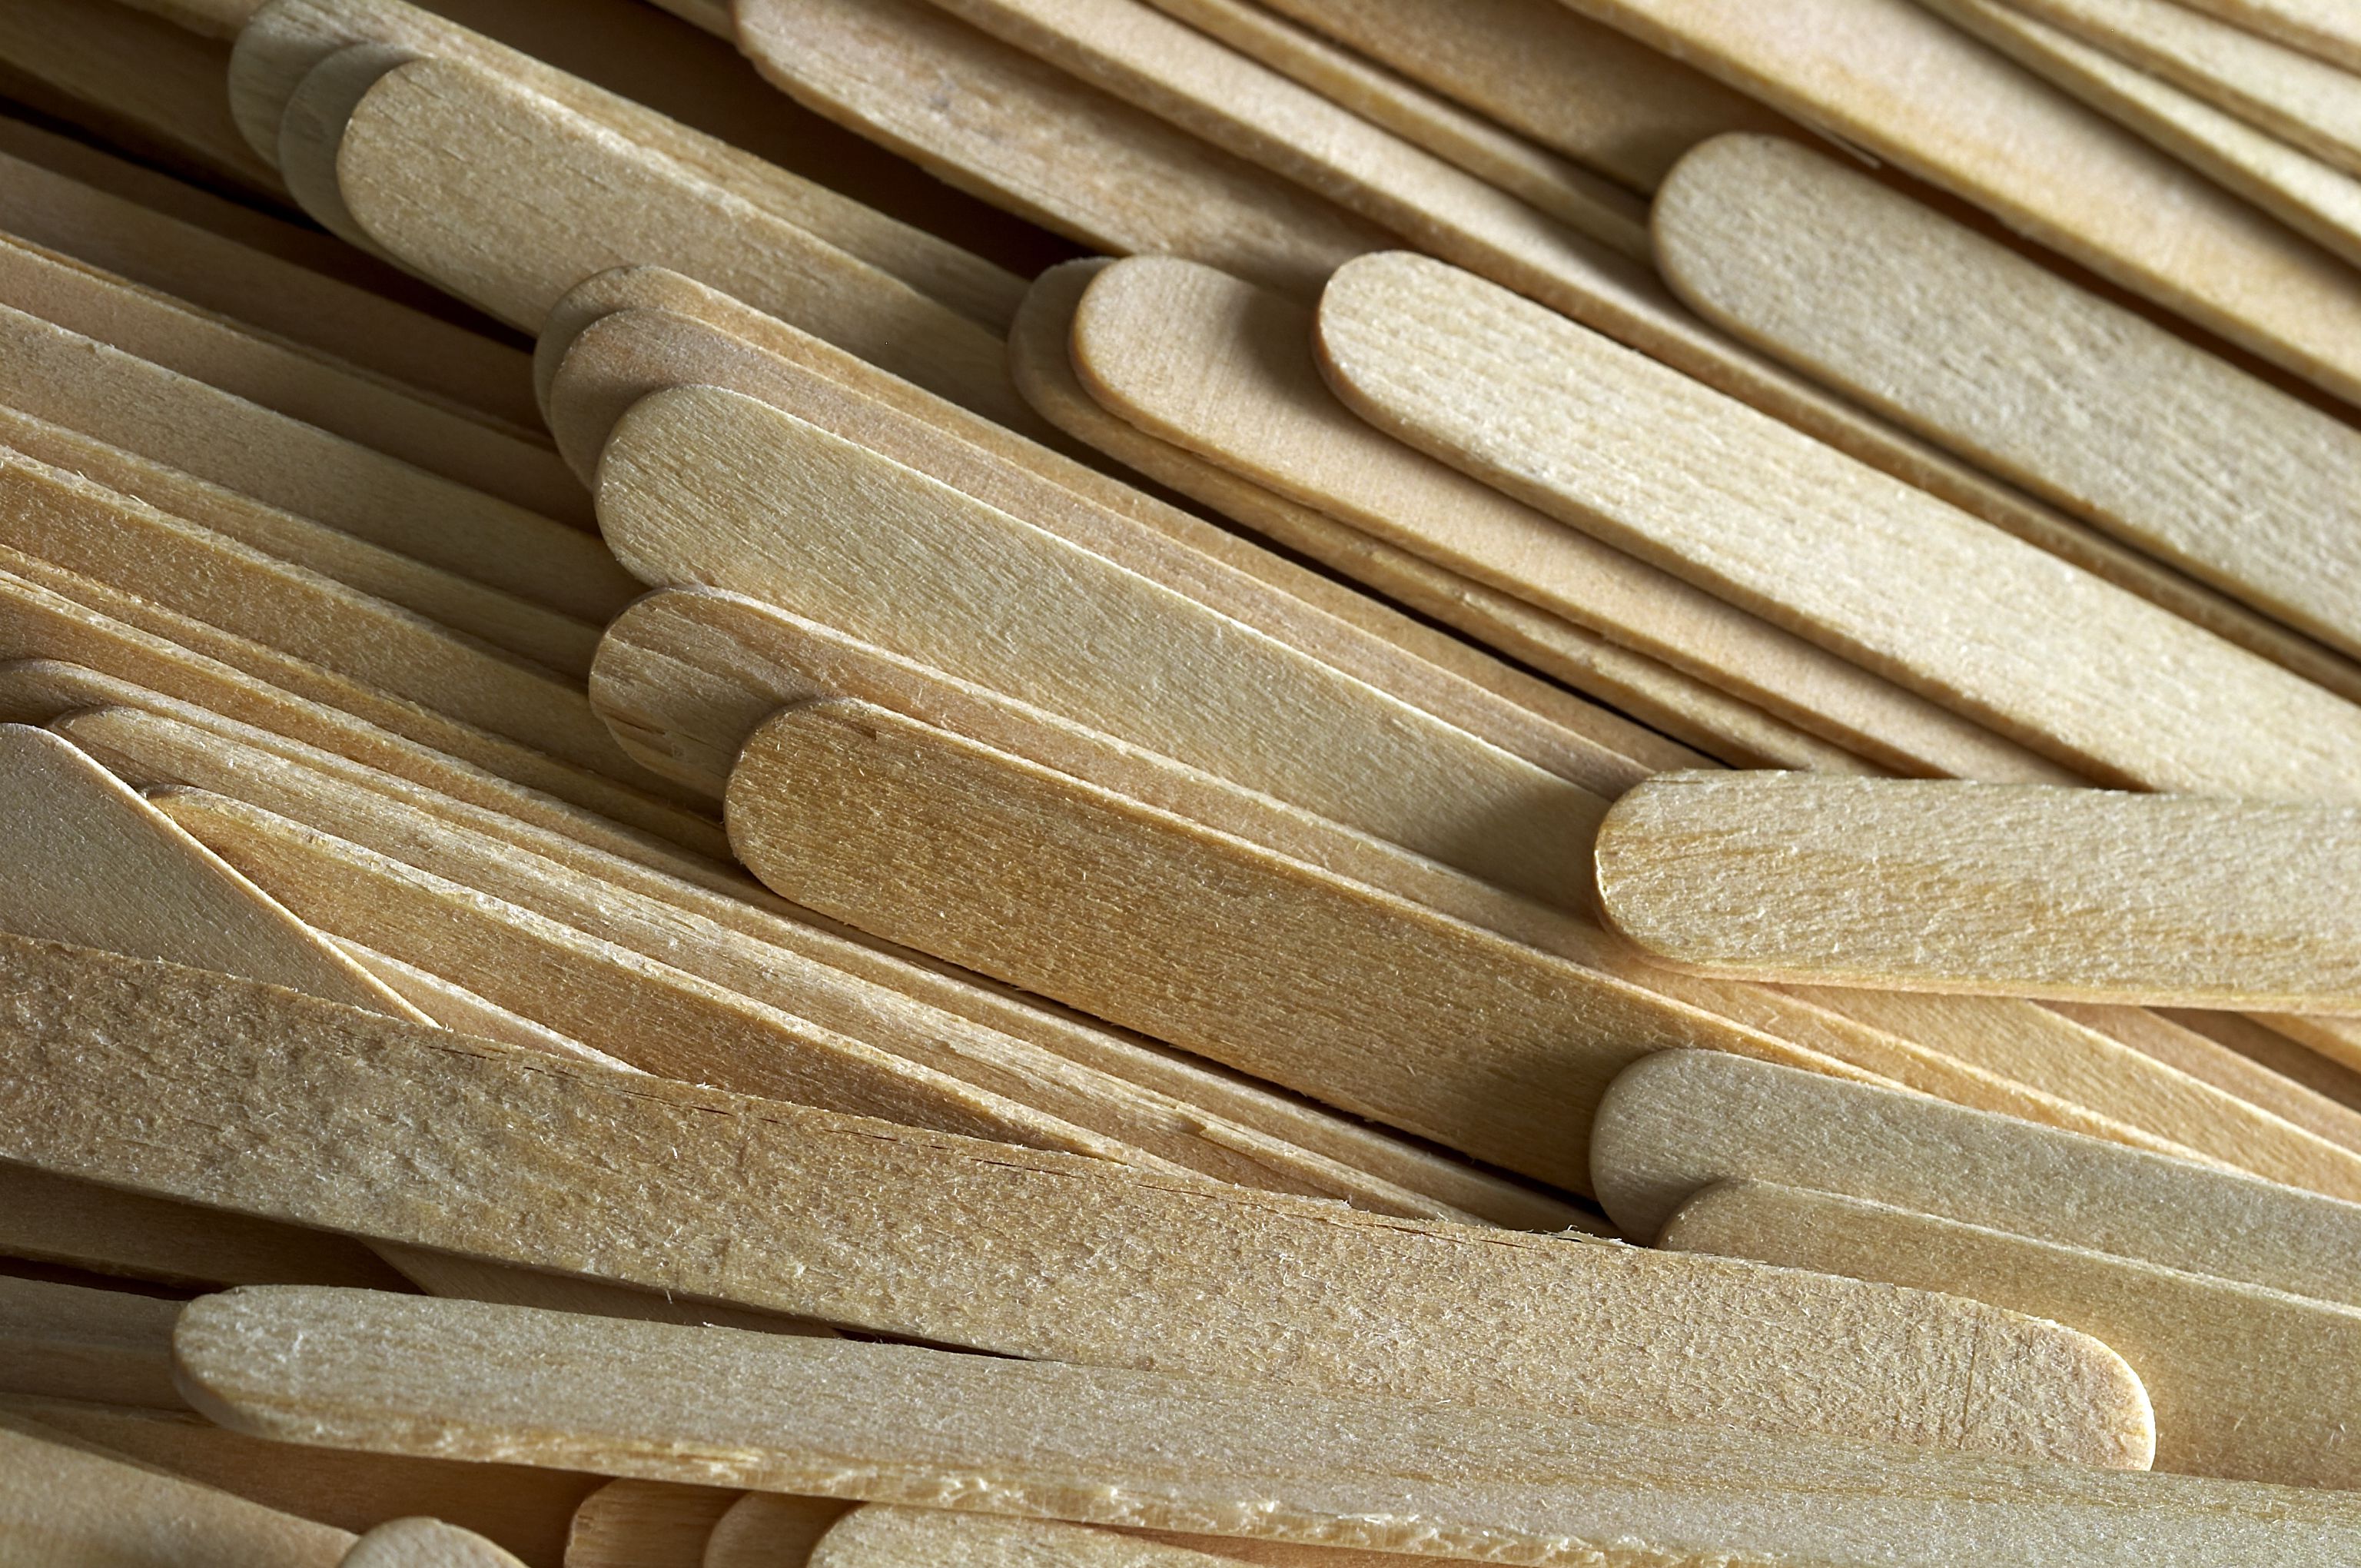 A collection of Popsicle sticks